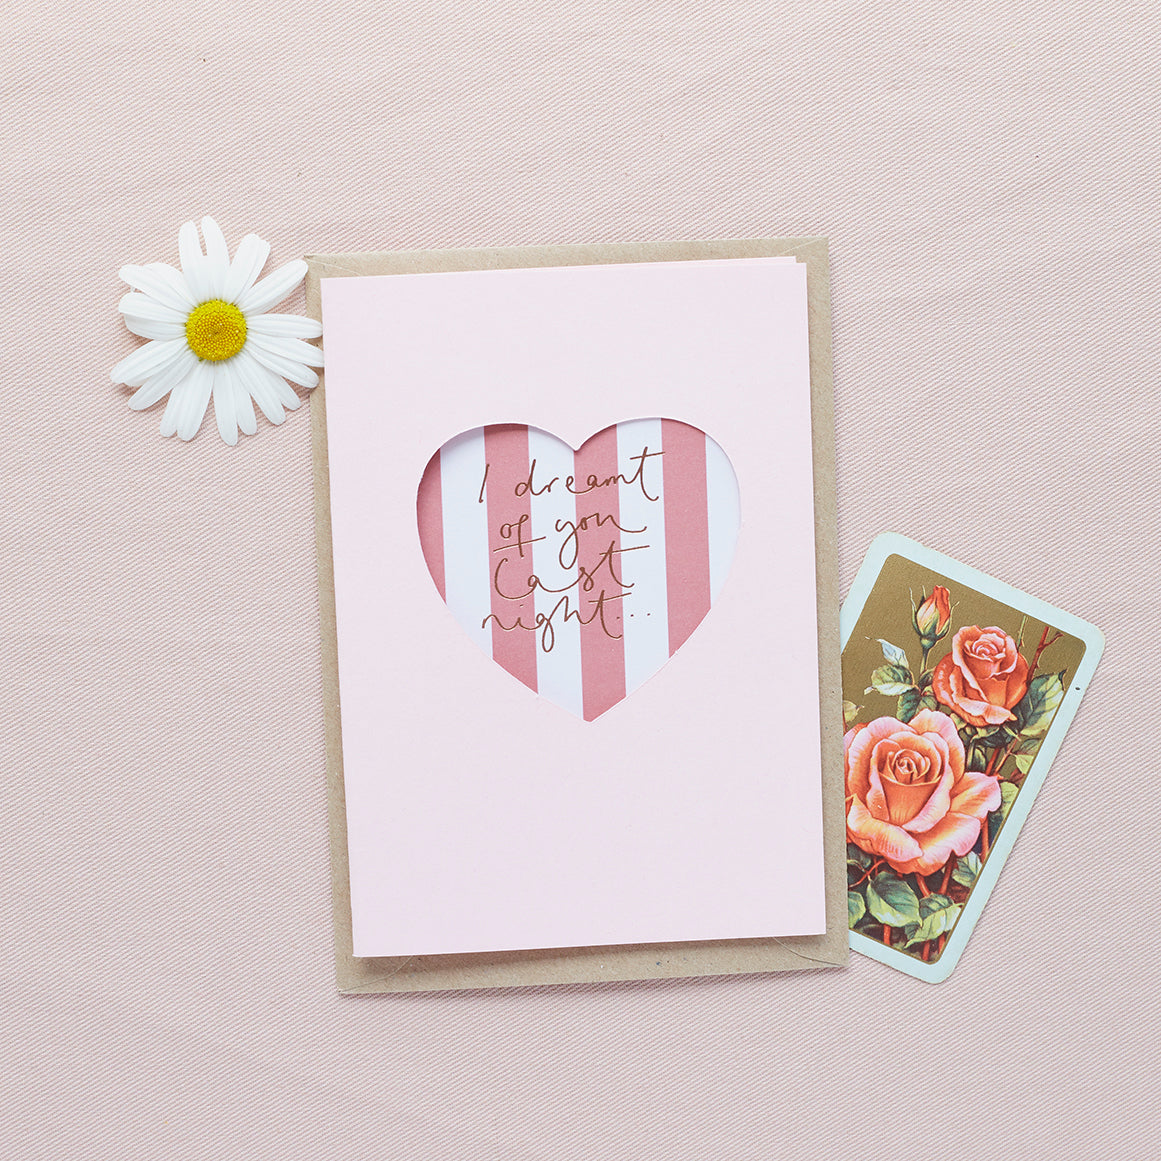 'I Dreamt About You Last Night...' Pink Cut Out Heart Card